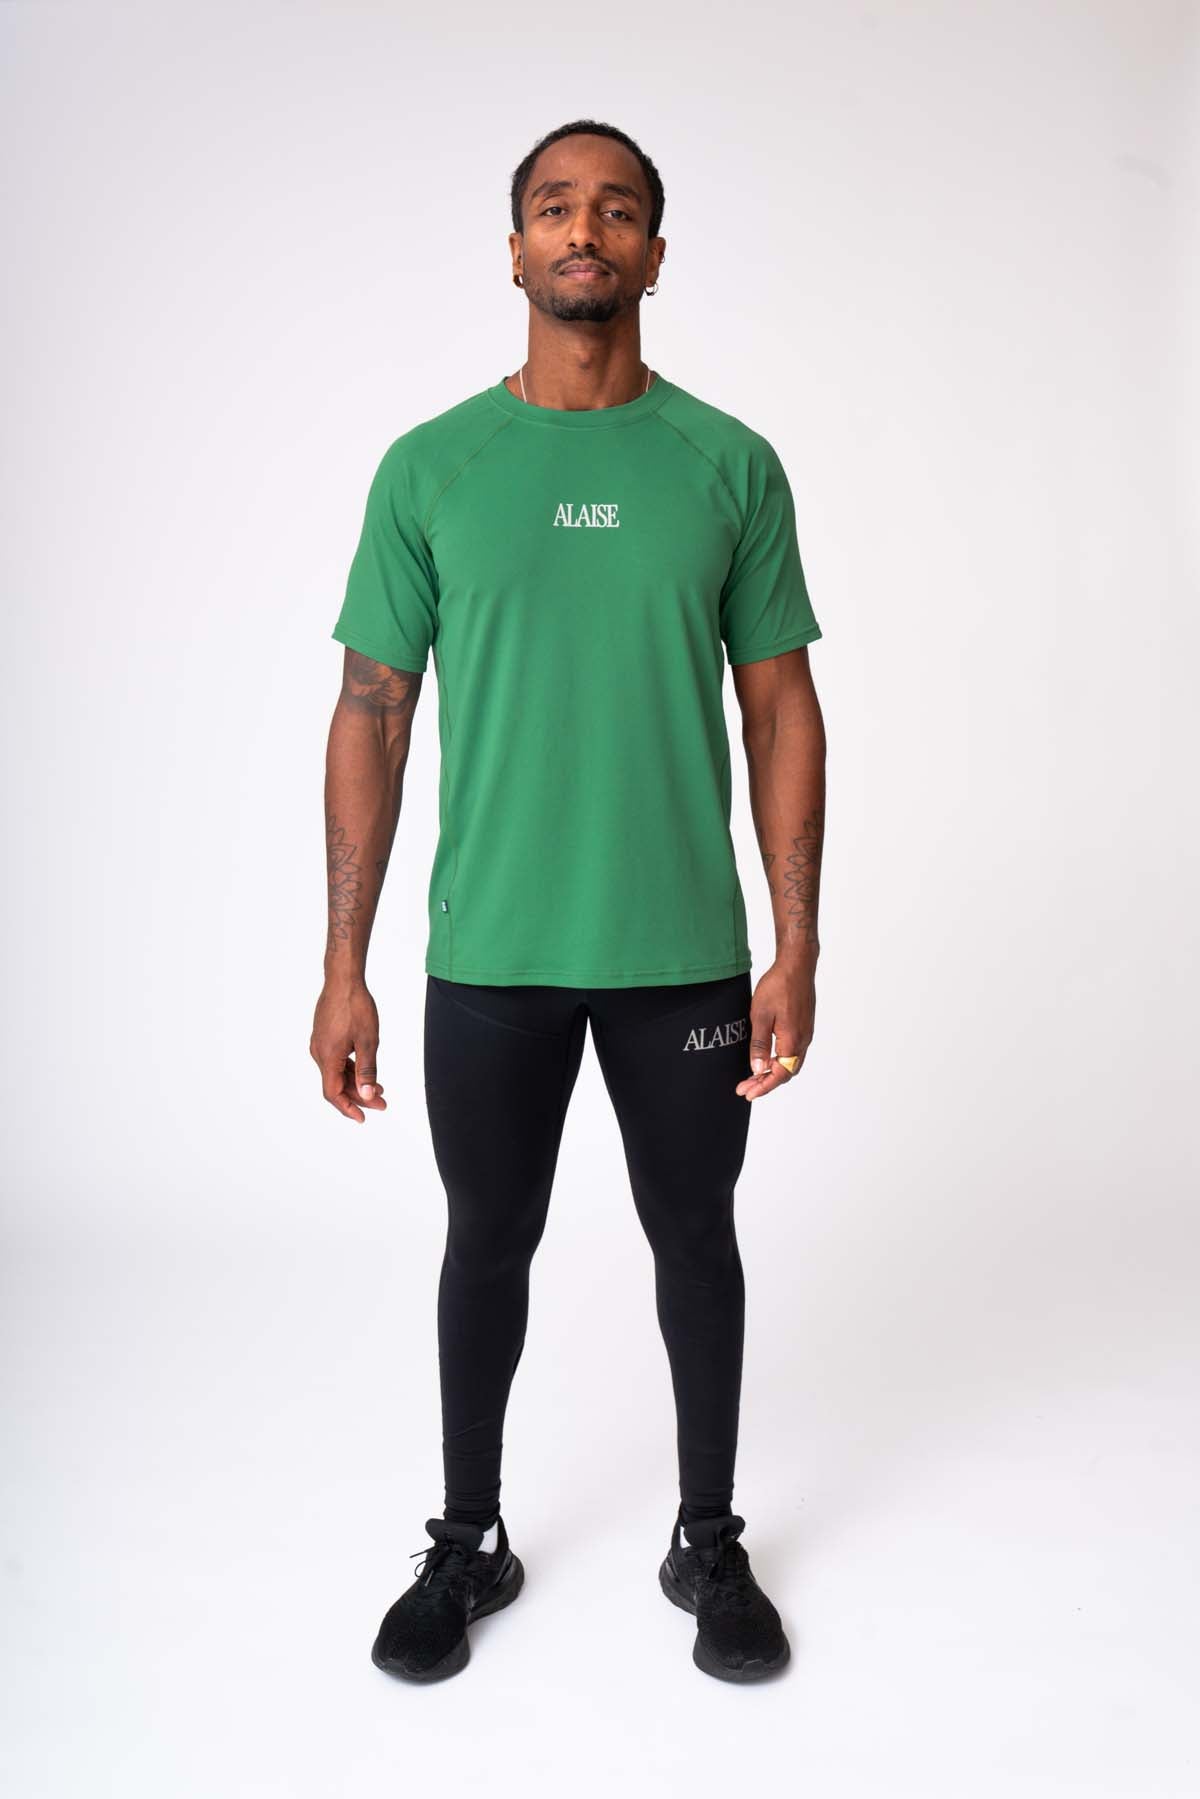 Alaise Active Graphic T-Shirt - Green